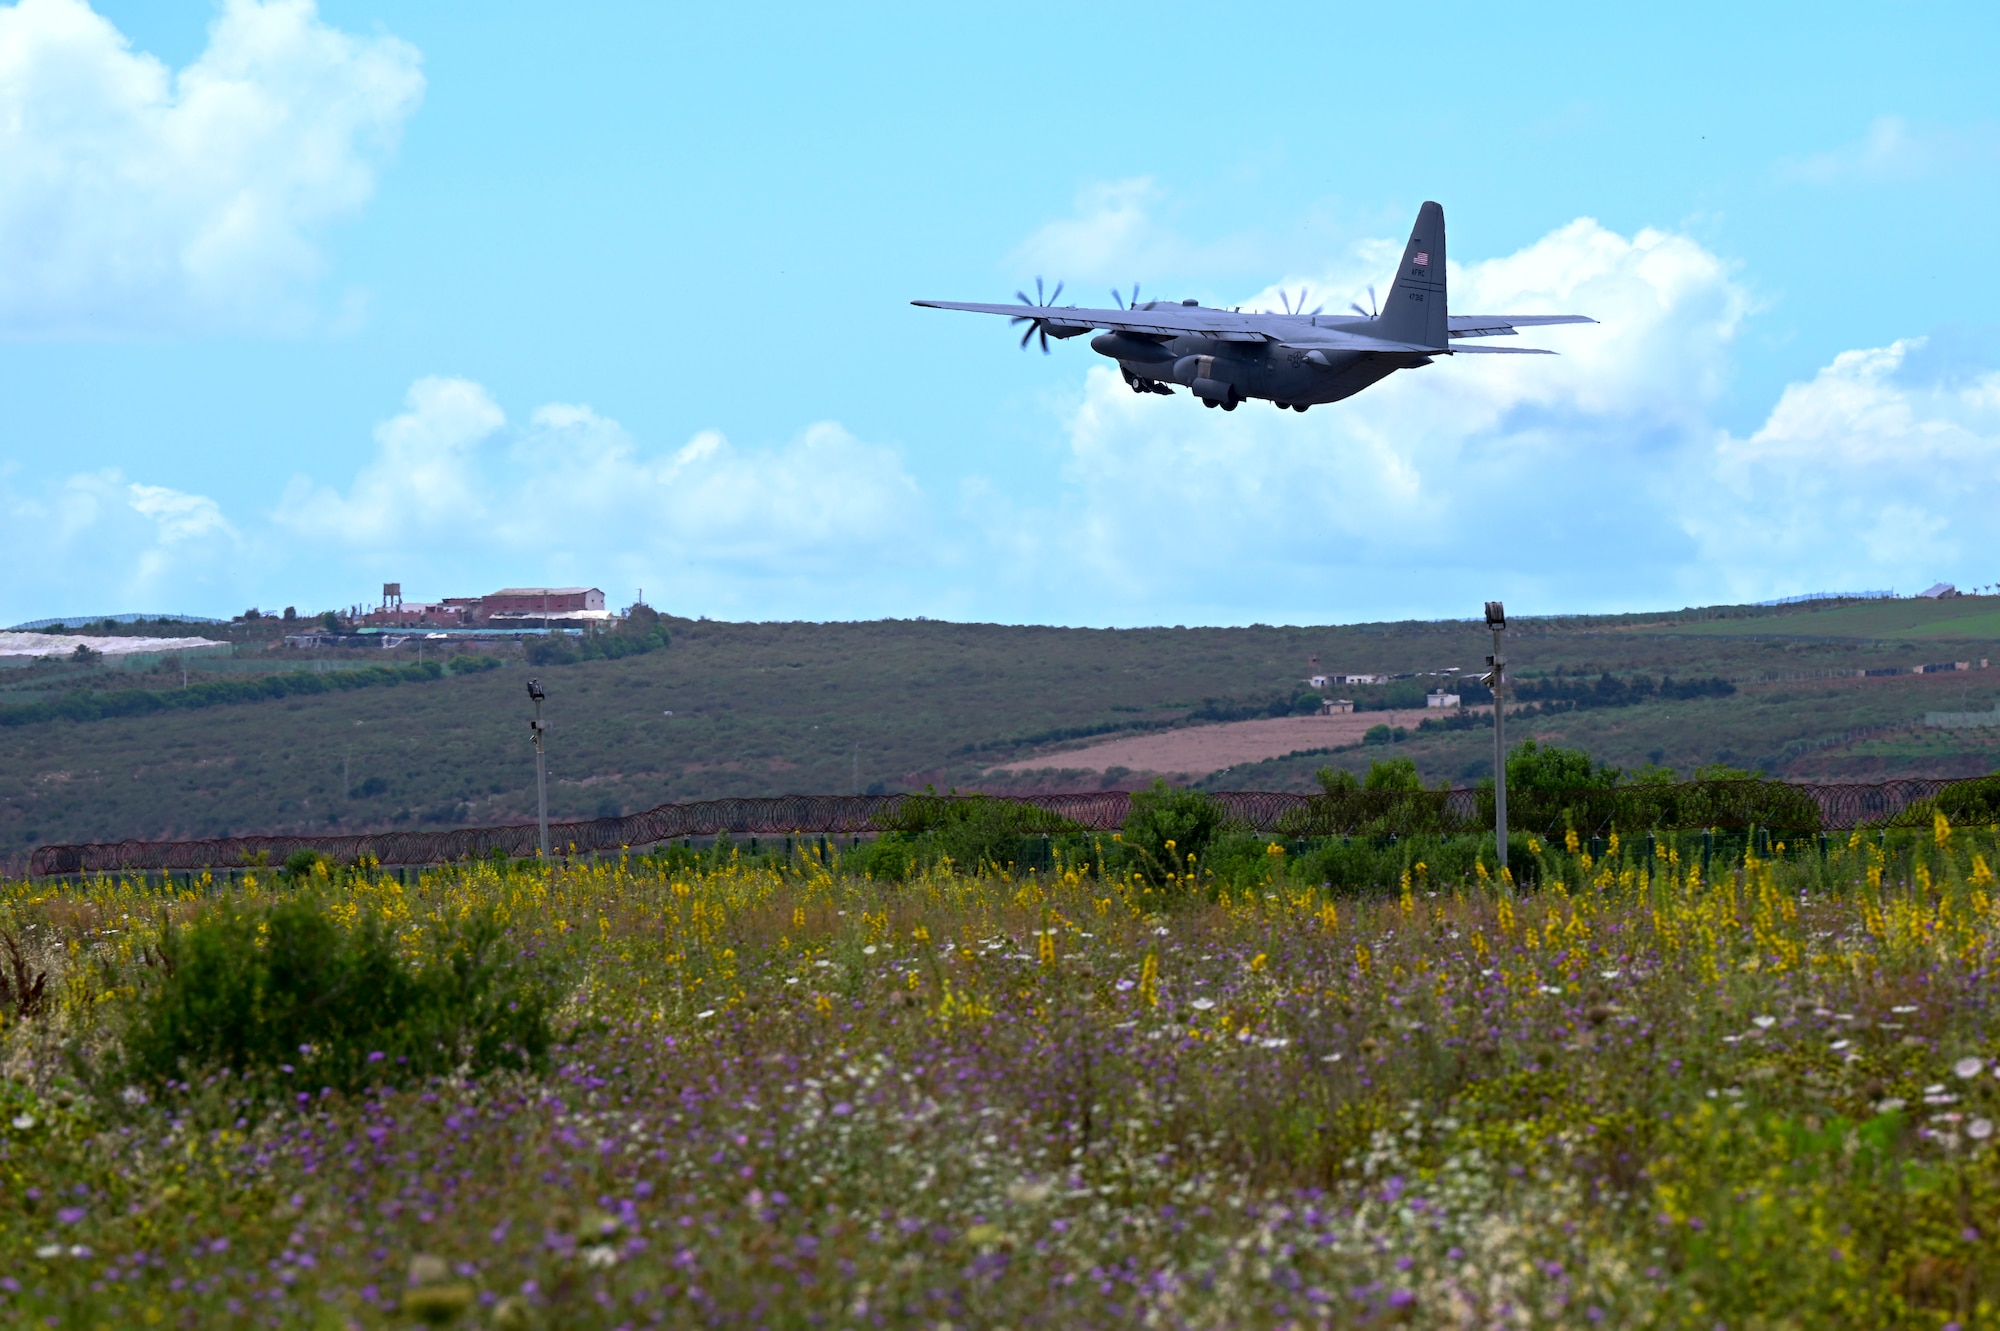 A U.S. Air Force C-130H3 Hercules assigned to Peterson Space Force Base, takes off during exercise African Lion 24 at Kenitra Air Base, Morocco, May 19, 2024. The 302nd AW will conduct a joint forcible entry exercise as well as cargo drop operations during this exercise.  Airborne insertions allow aircrew to sharpen vital airdrop skills as they rapidly and safely drop the maximum number of personnel at a specific location. (U.S. Air Force photo by Senior Airman Jenna A. Bond)